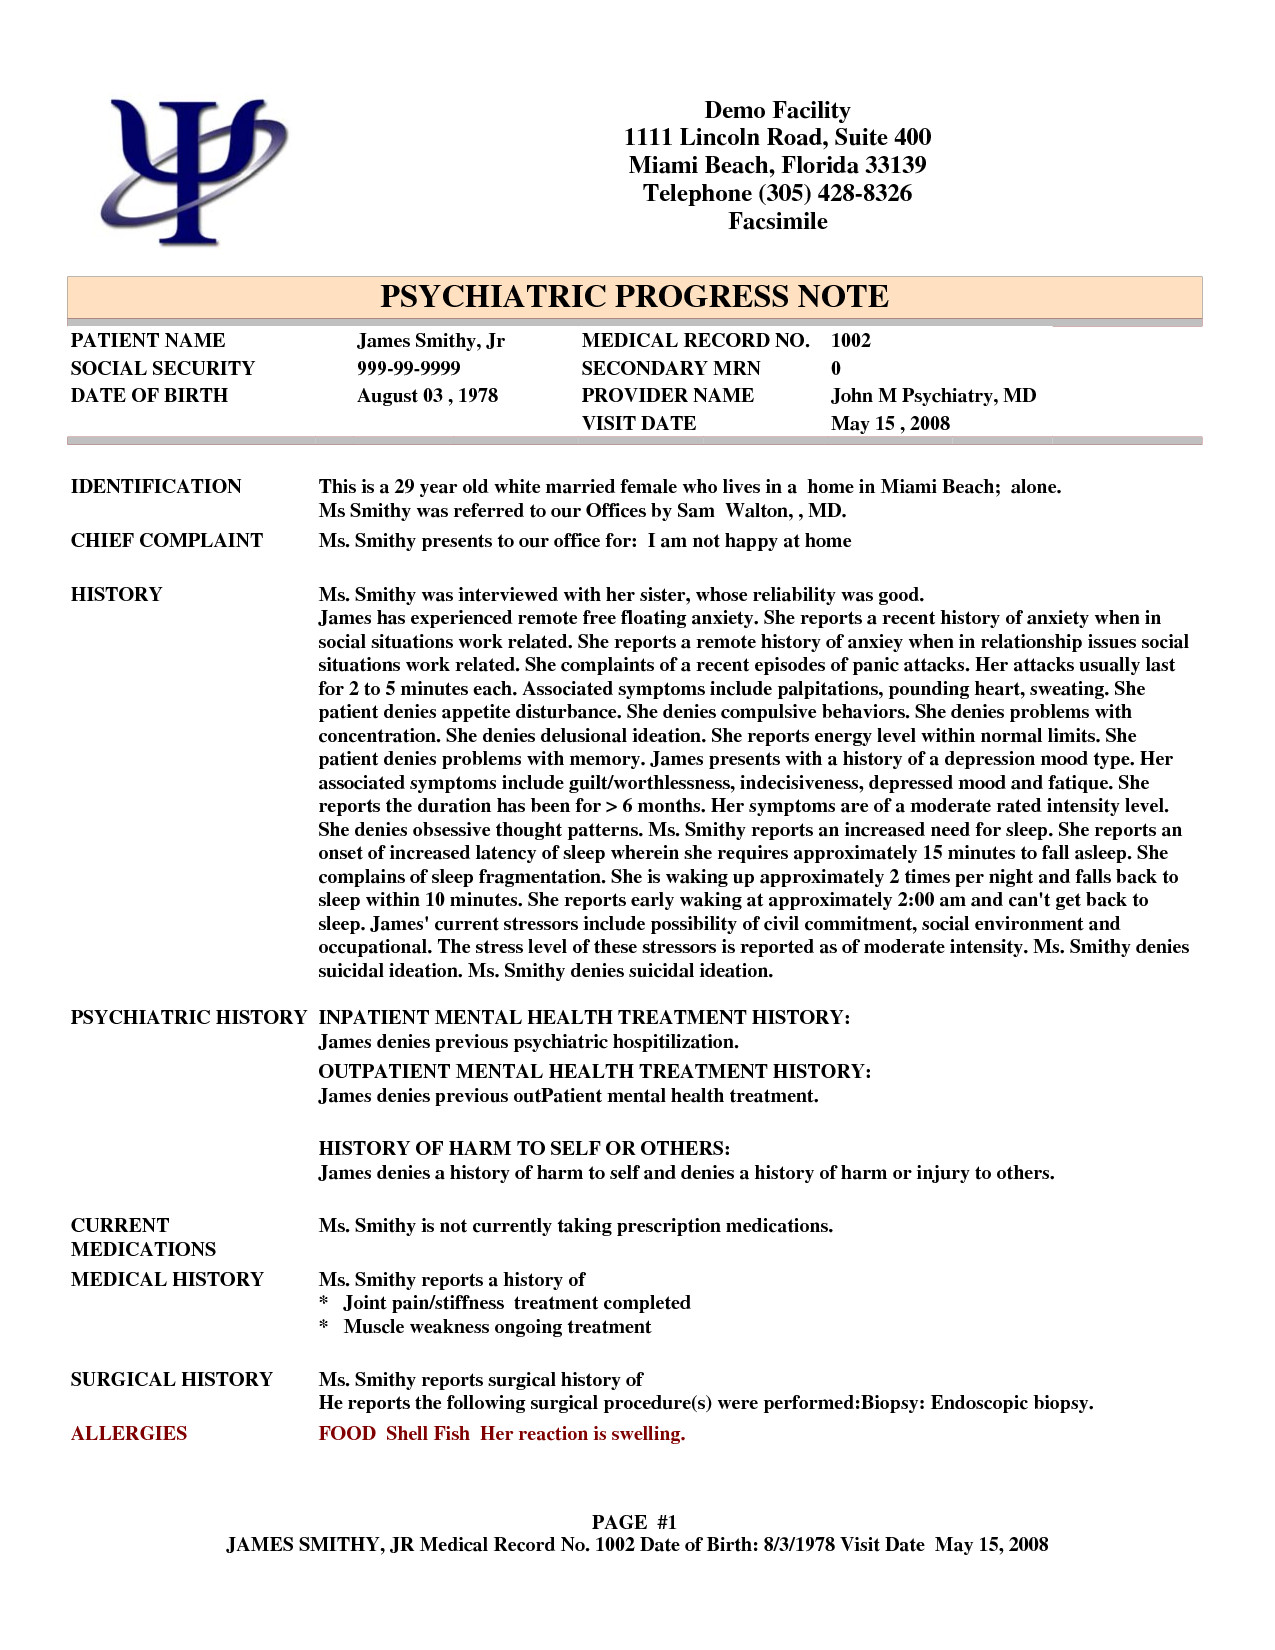 Psychiatric soap Note Template Psychotherapy Progress Notes Template Google Search